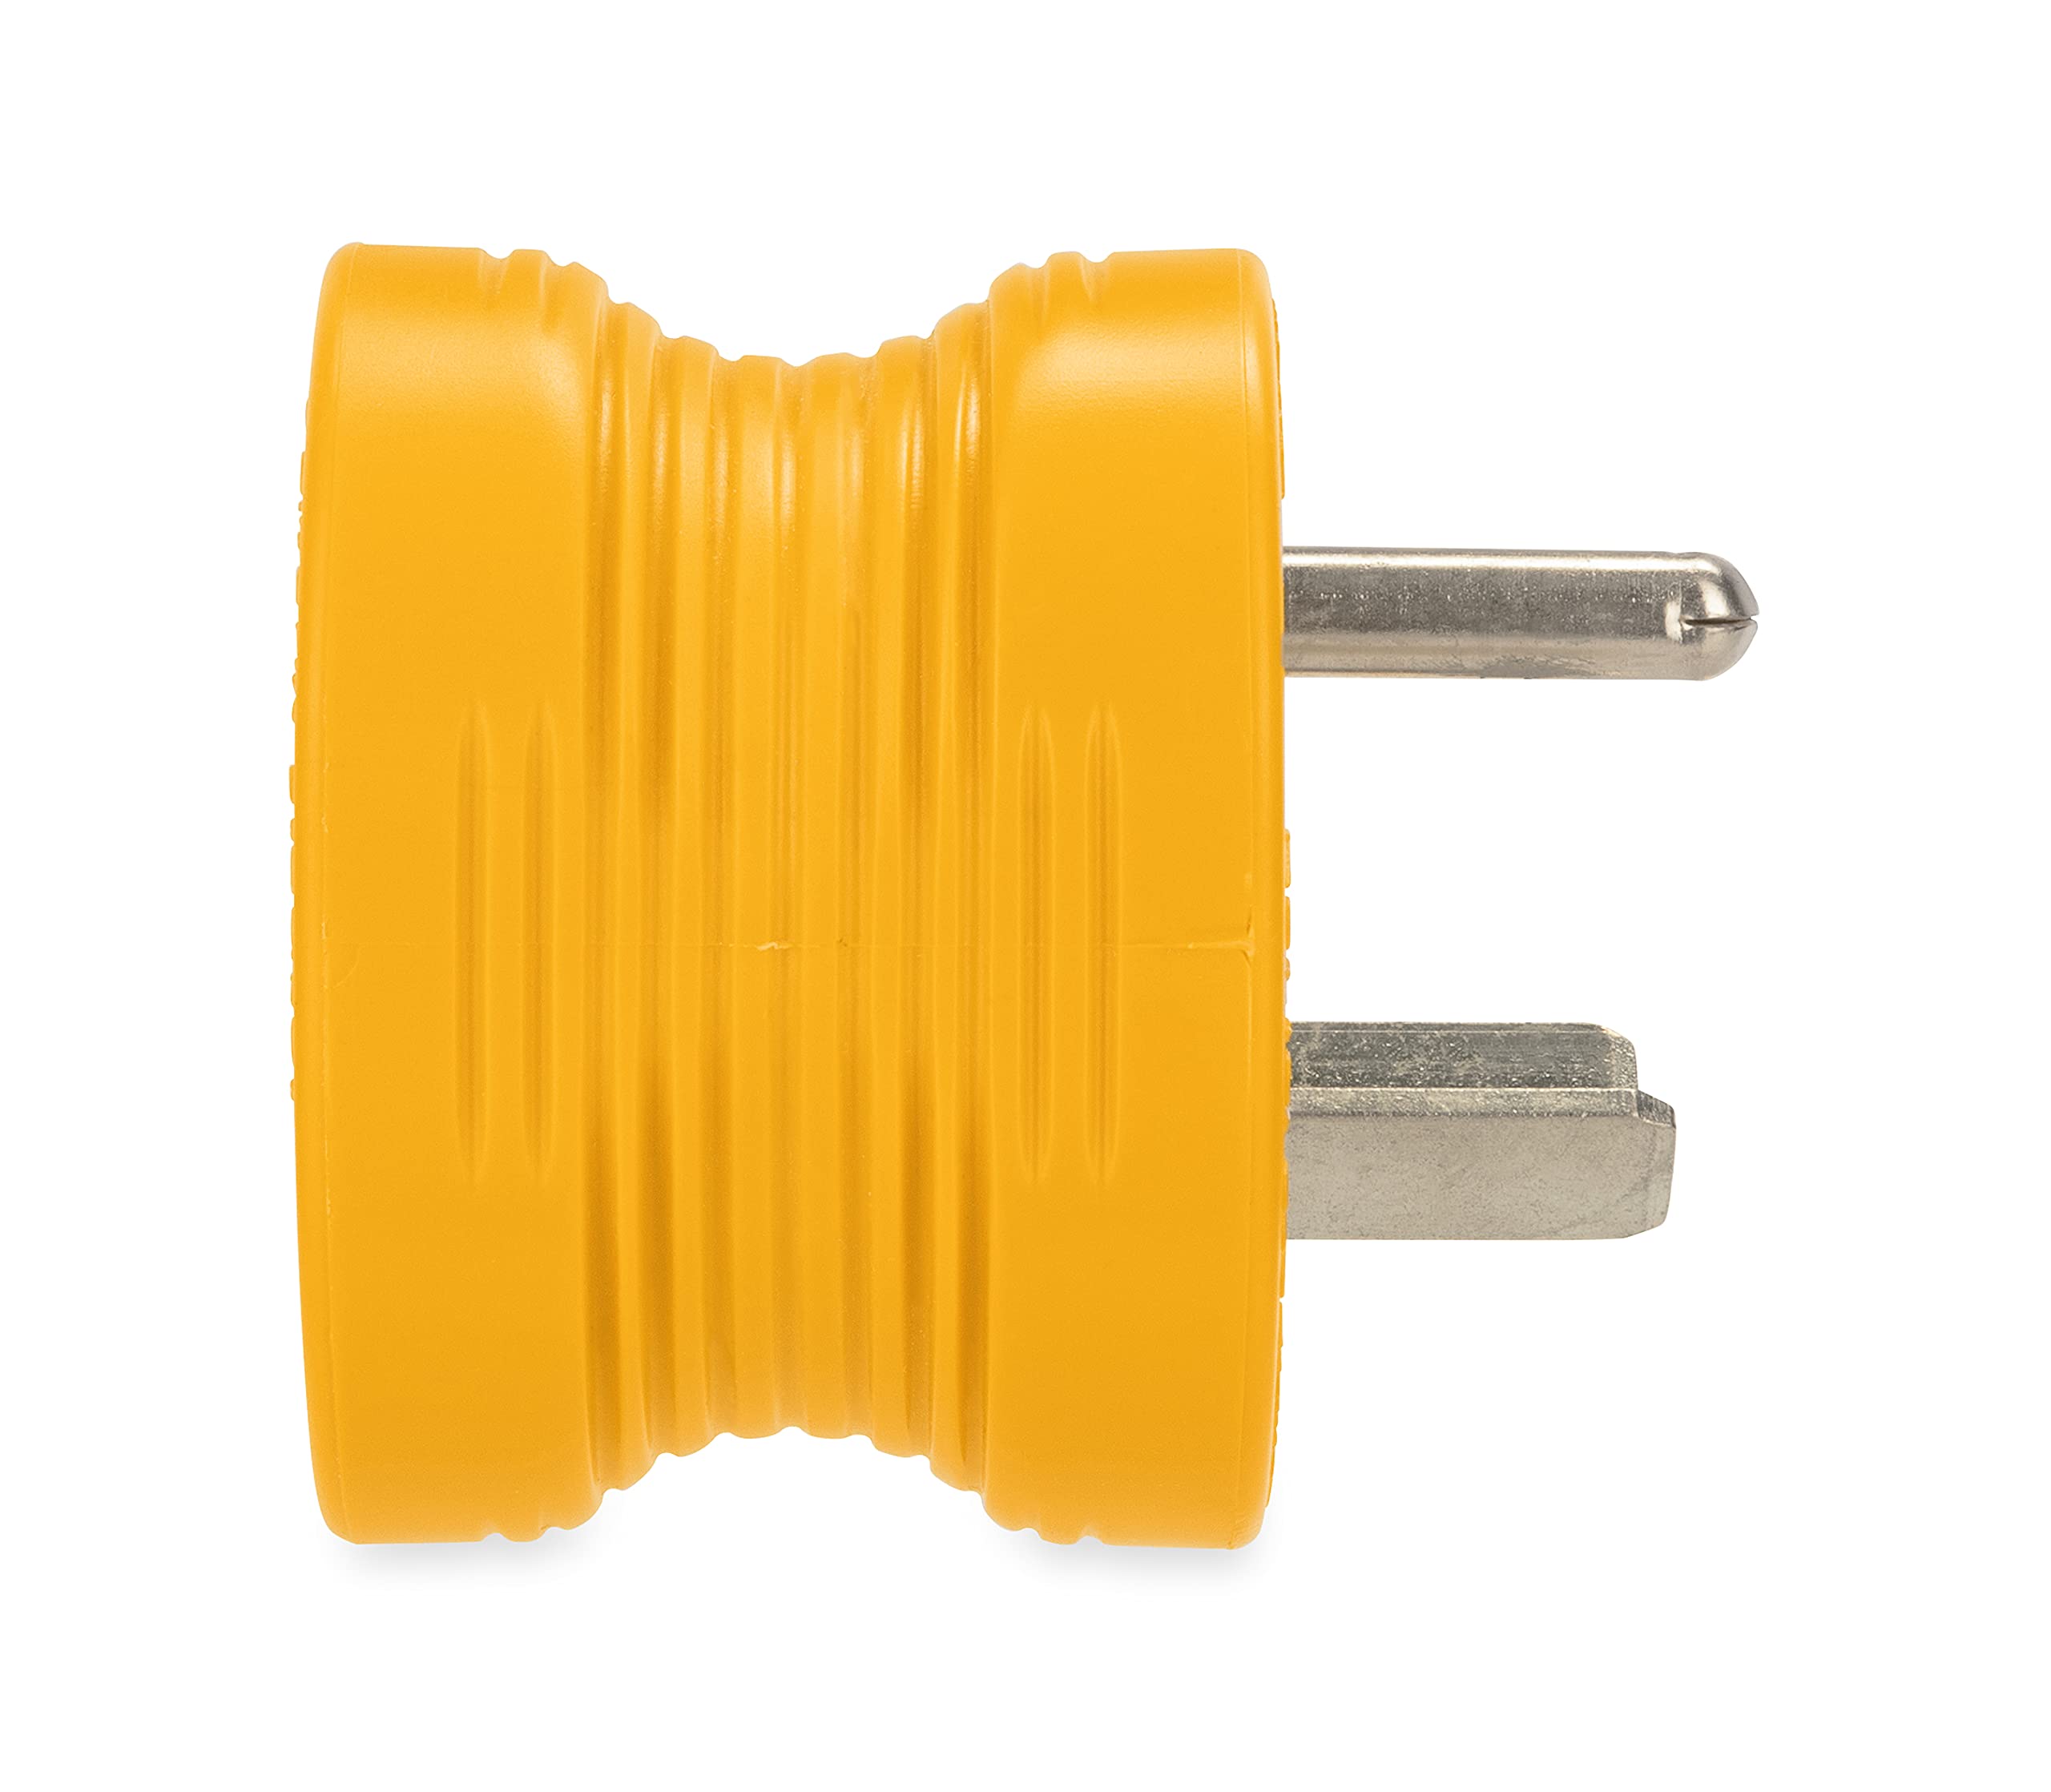 Camco Power Grip Camper/RV 30AM/15AF Electrical Adapter | Easy Connection of Standard 30-Amp Power Pedestals to Fit a Standard Residential Plug | Allows for Easy Outlet Removal (55233),Yellow|Yellow